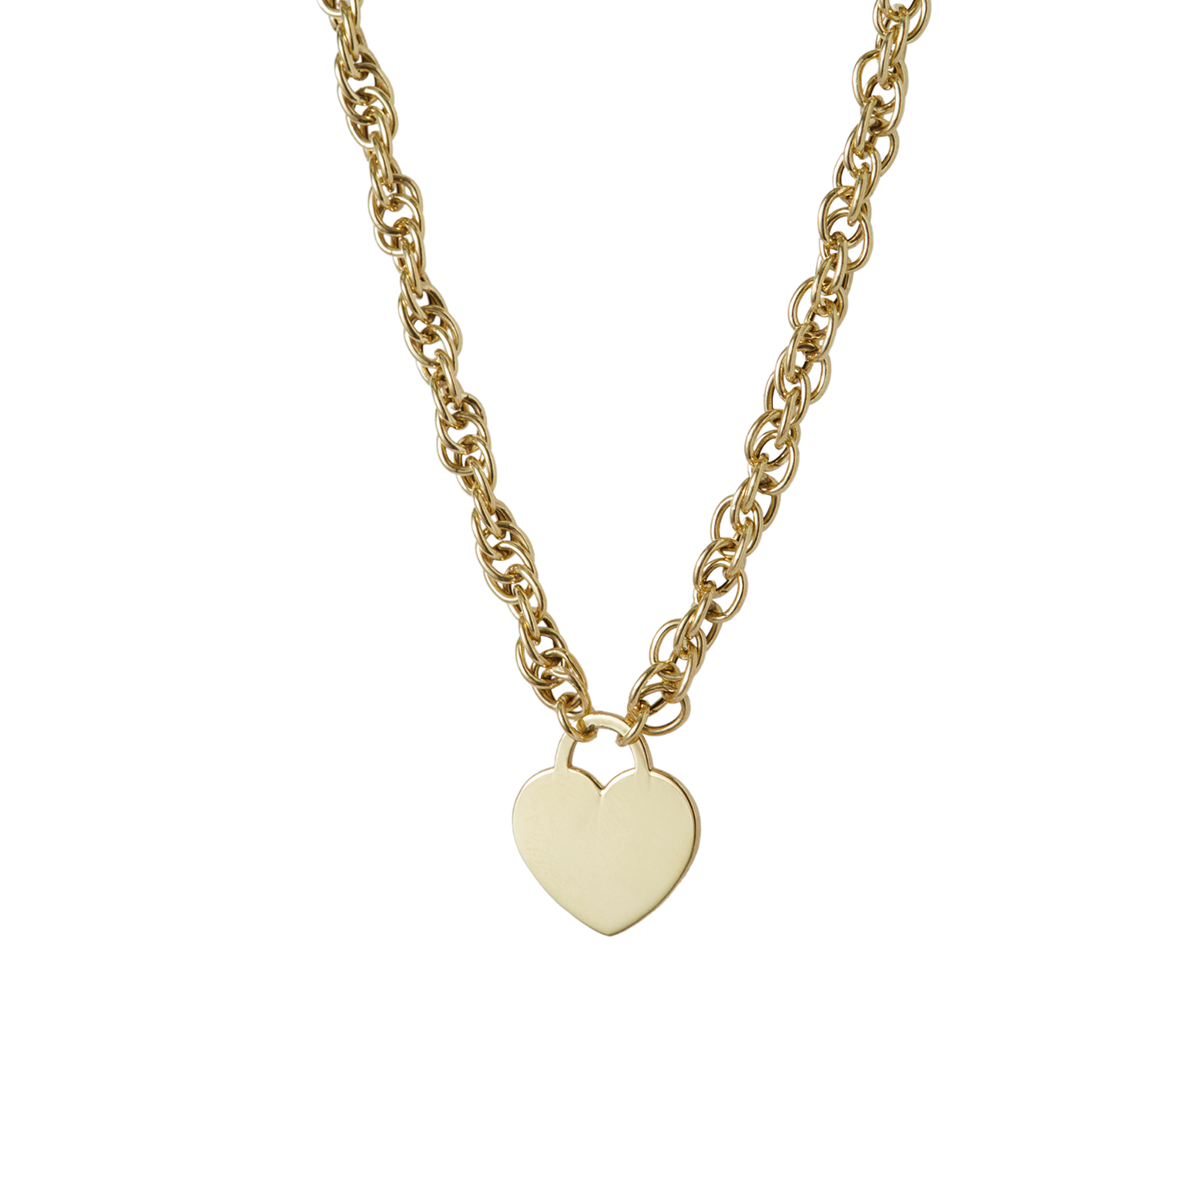 THE HEART LINK NECKLACE